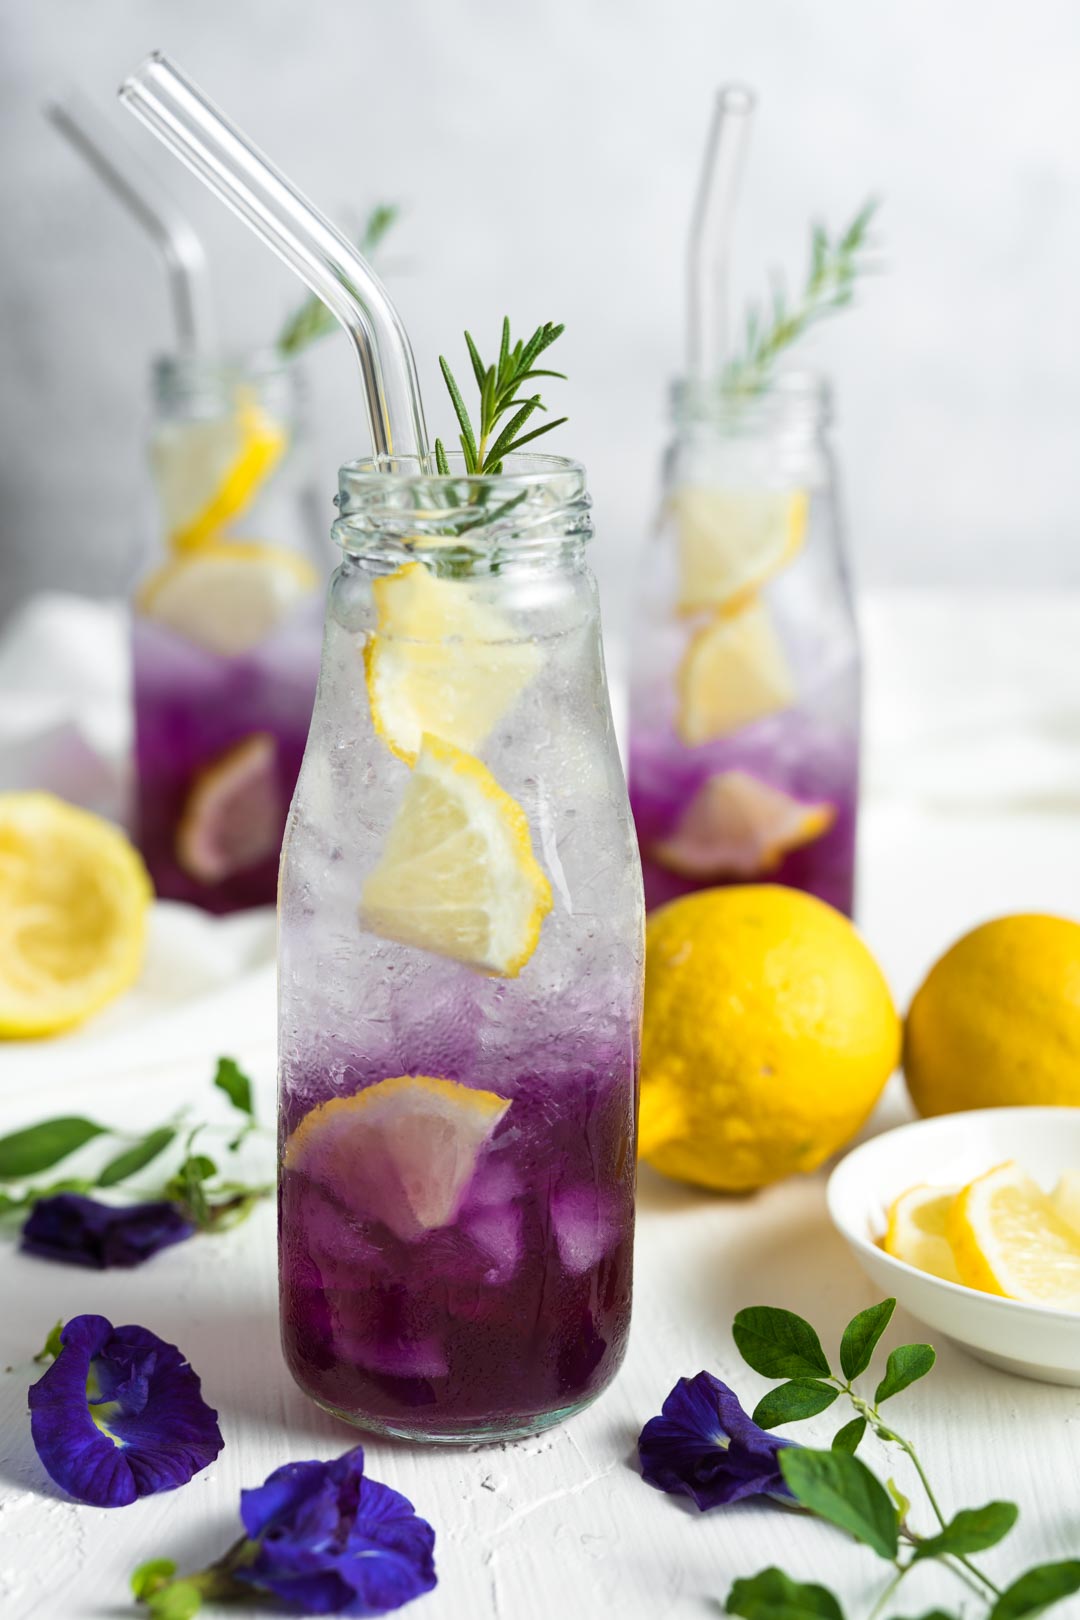 Sparkling Butterfly Pea Flower Tea Lemonade - Cooking with a Wallflower